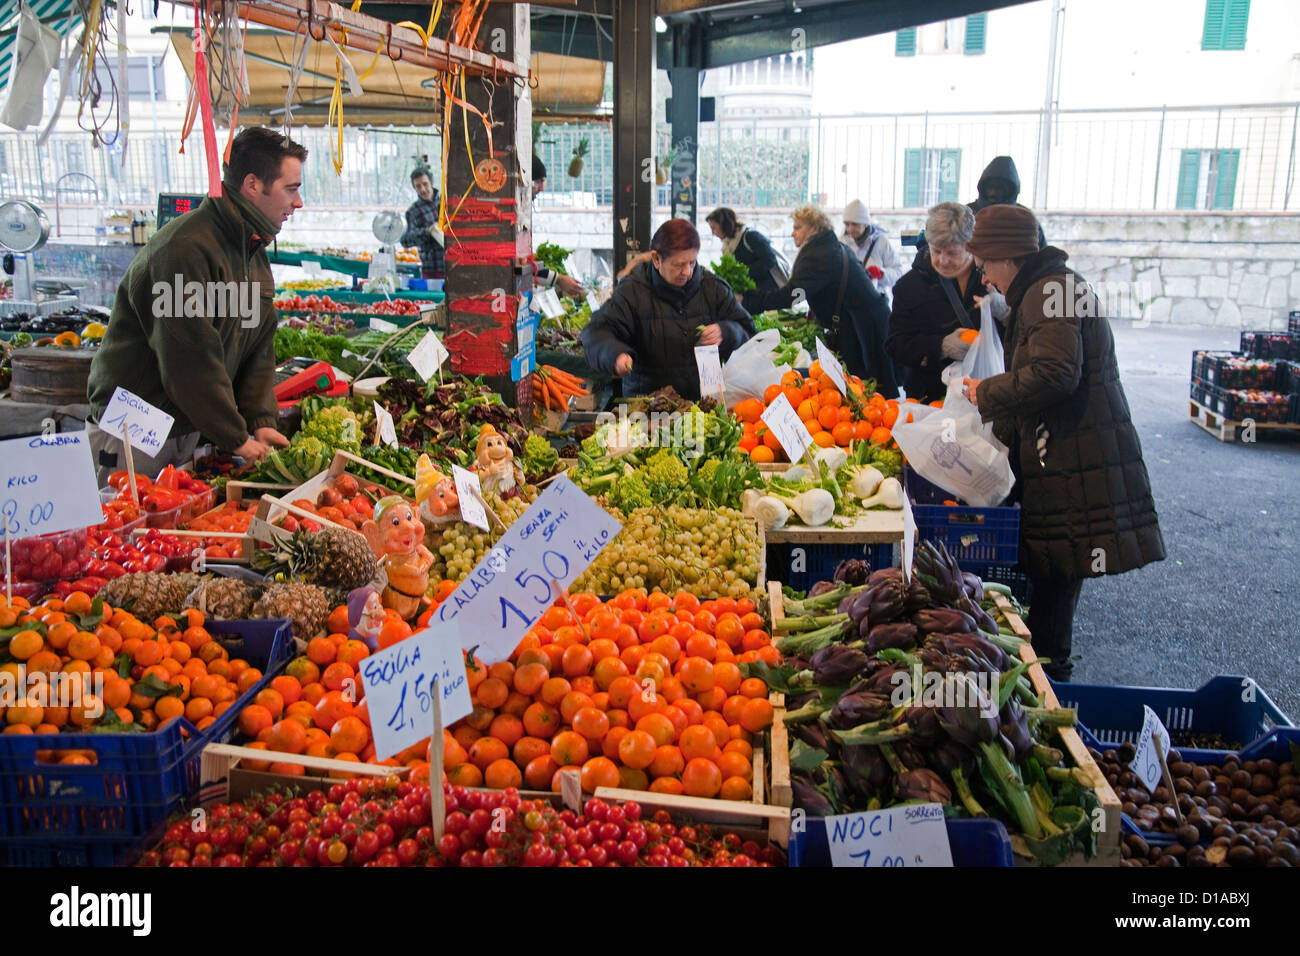 Greengrocer Stall Market Stock Photo